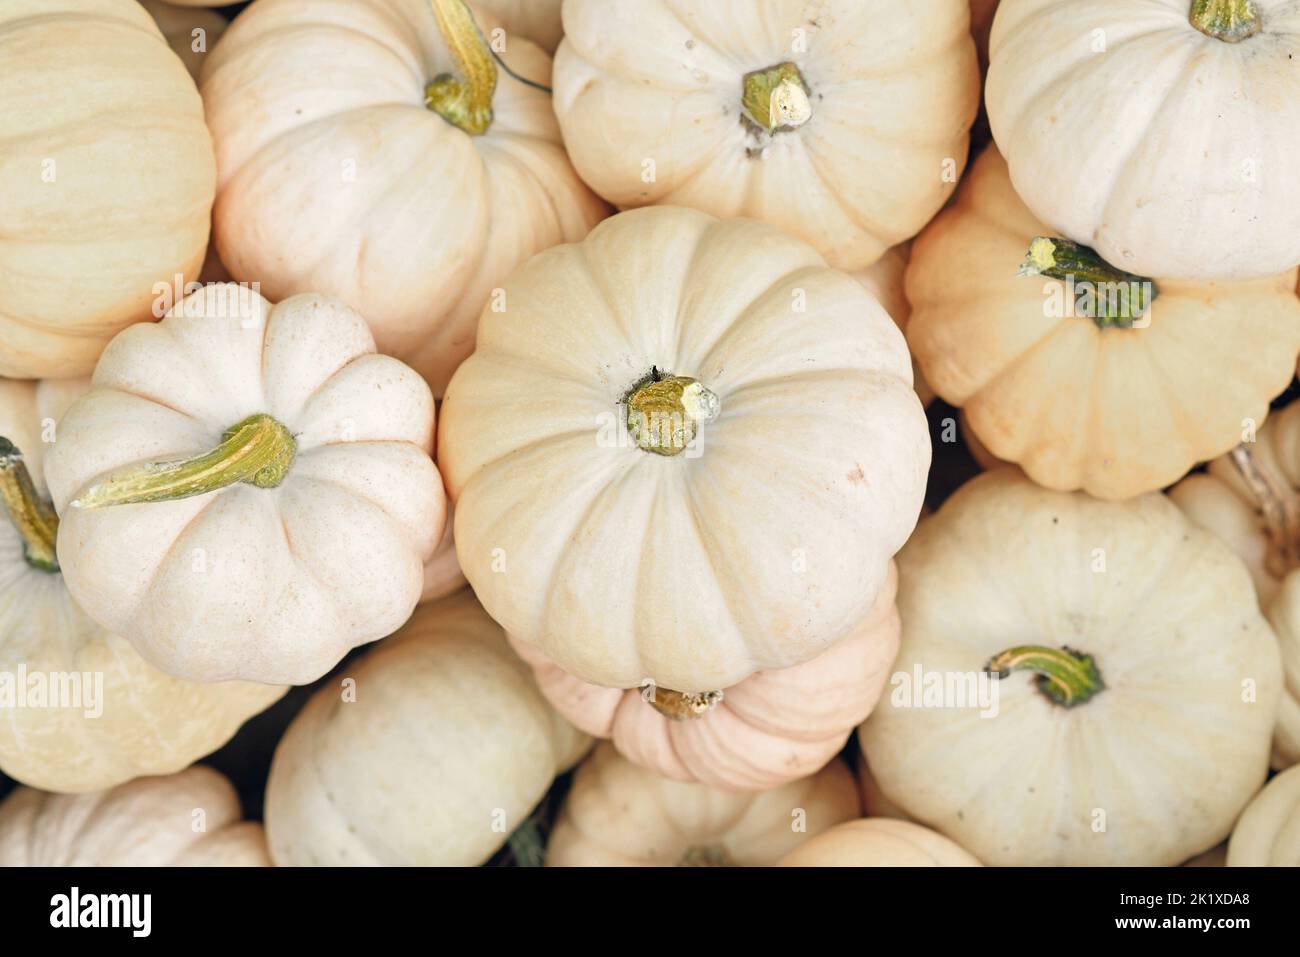 Top view of many small white Baby Boo pumpkin in pile Stock Photo